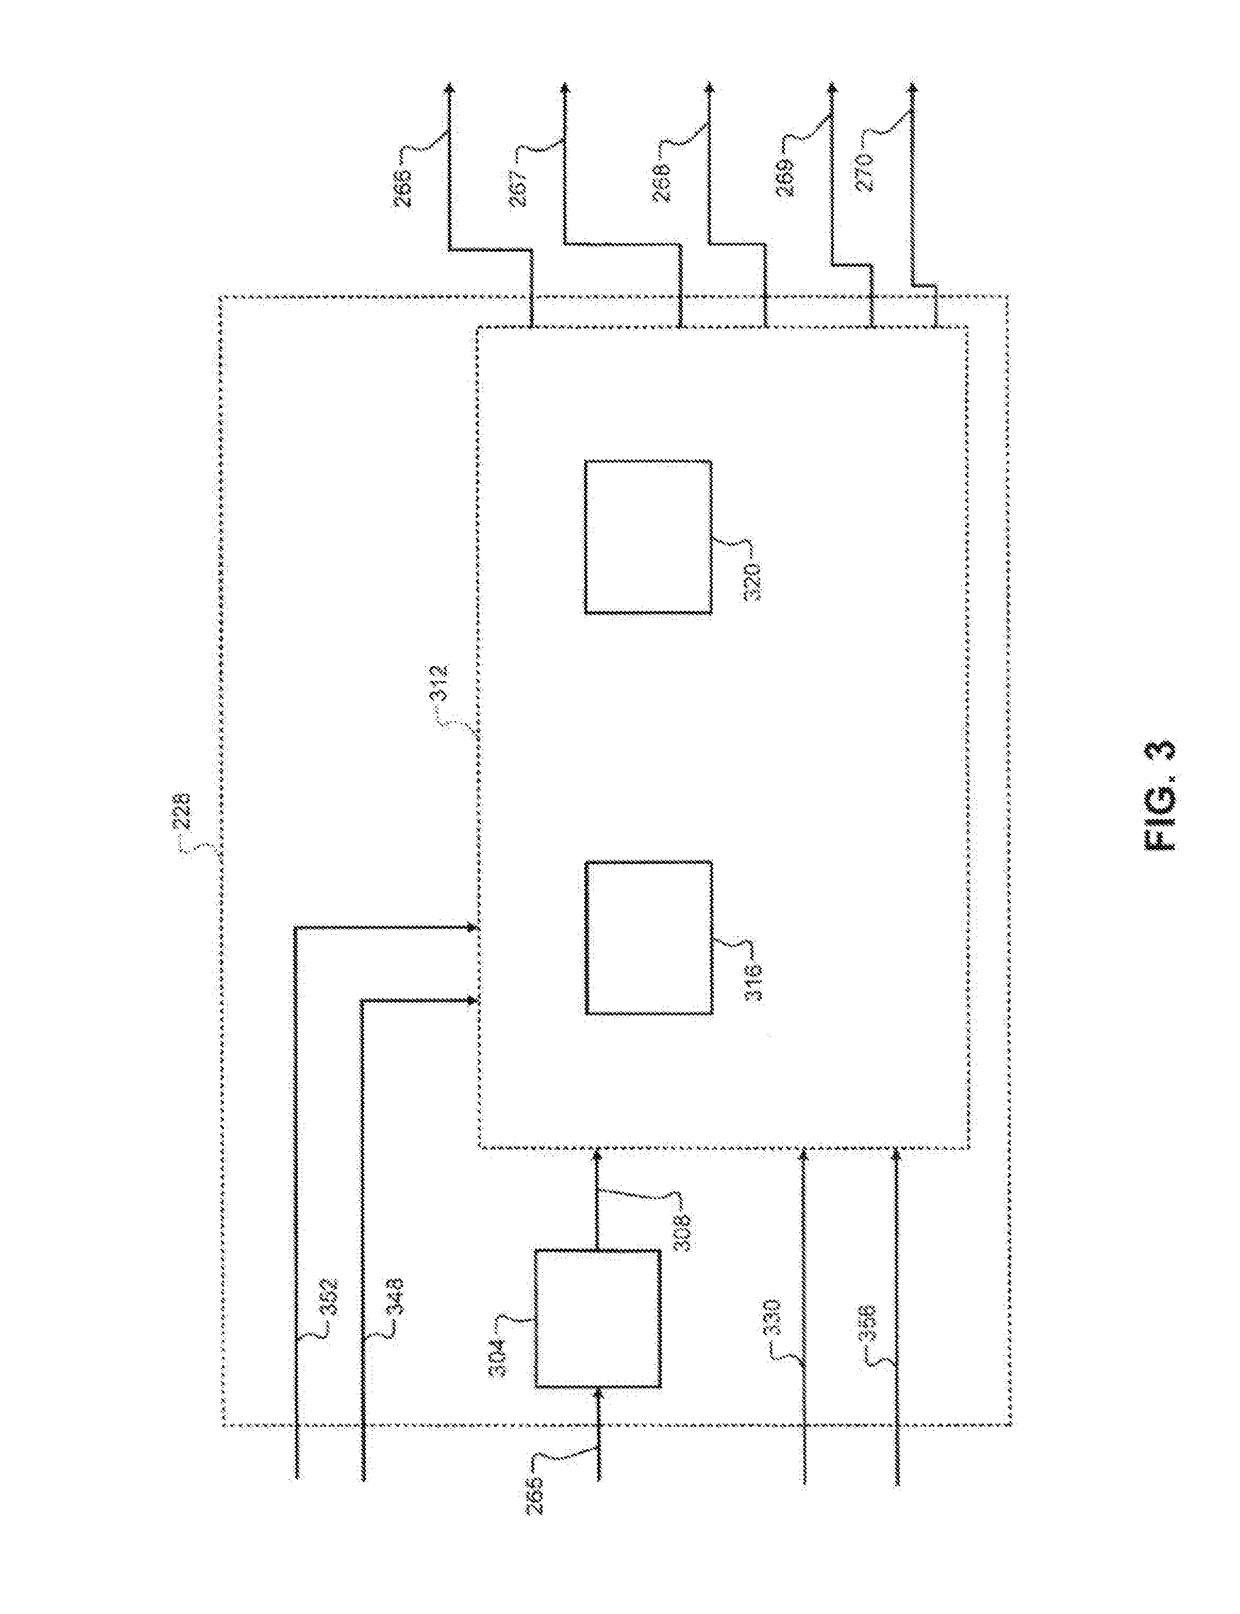 Model predictive control systems and methods for increasing computational efficiency